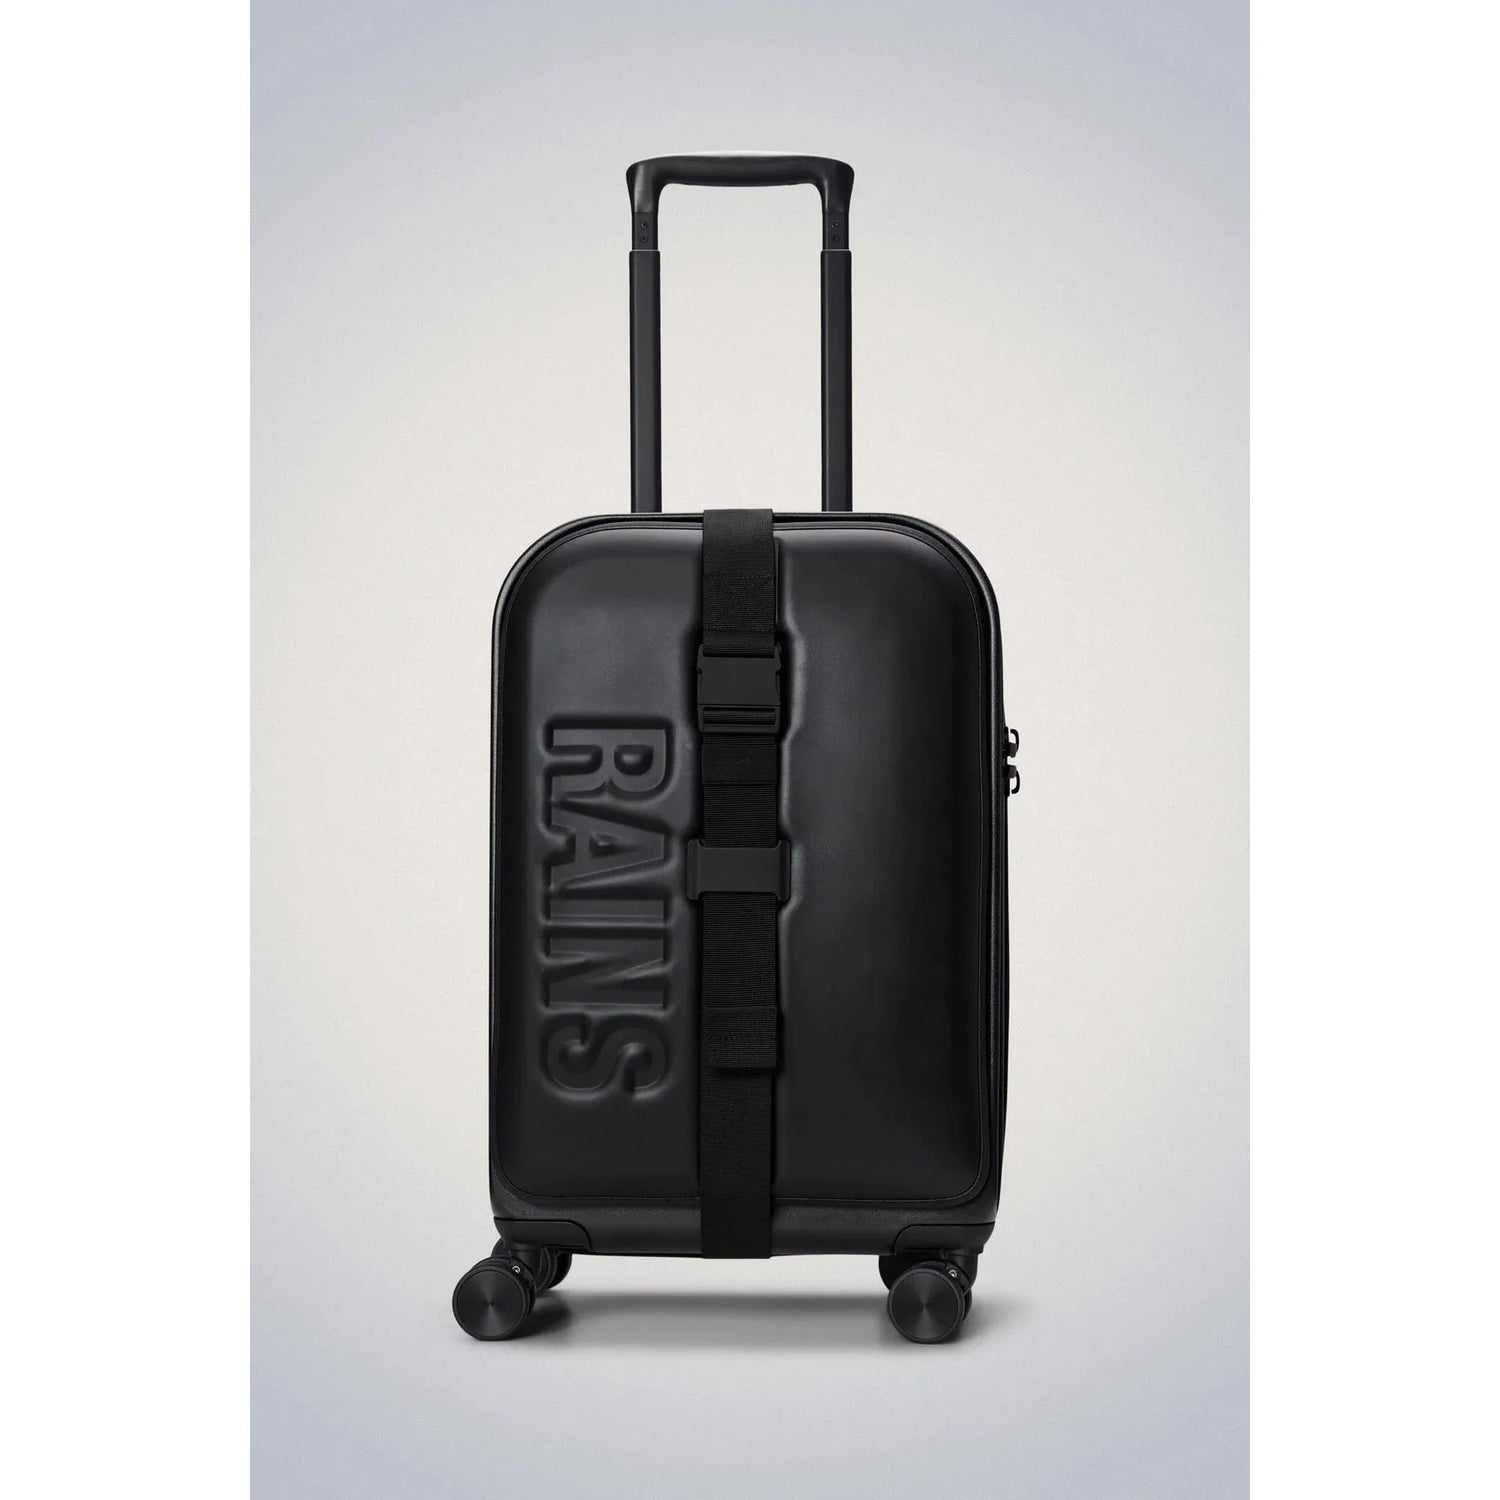 RAINS Luggage 22 x 13 x 9.8 inches / Black / Polycarbonate and polyester RAINS Texel Cabin Trolley